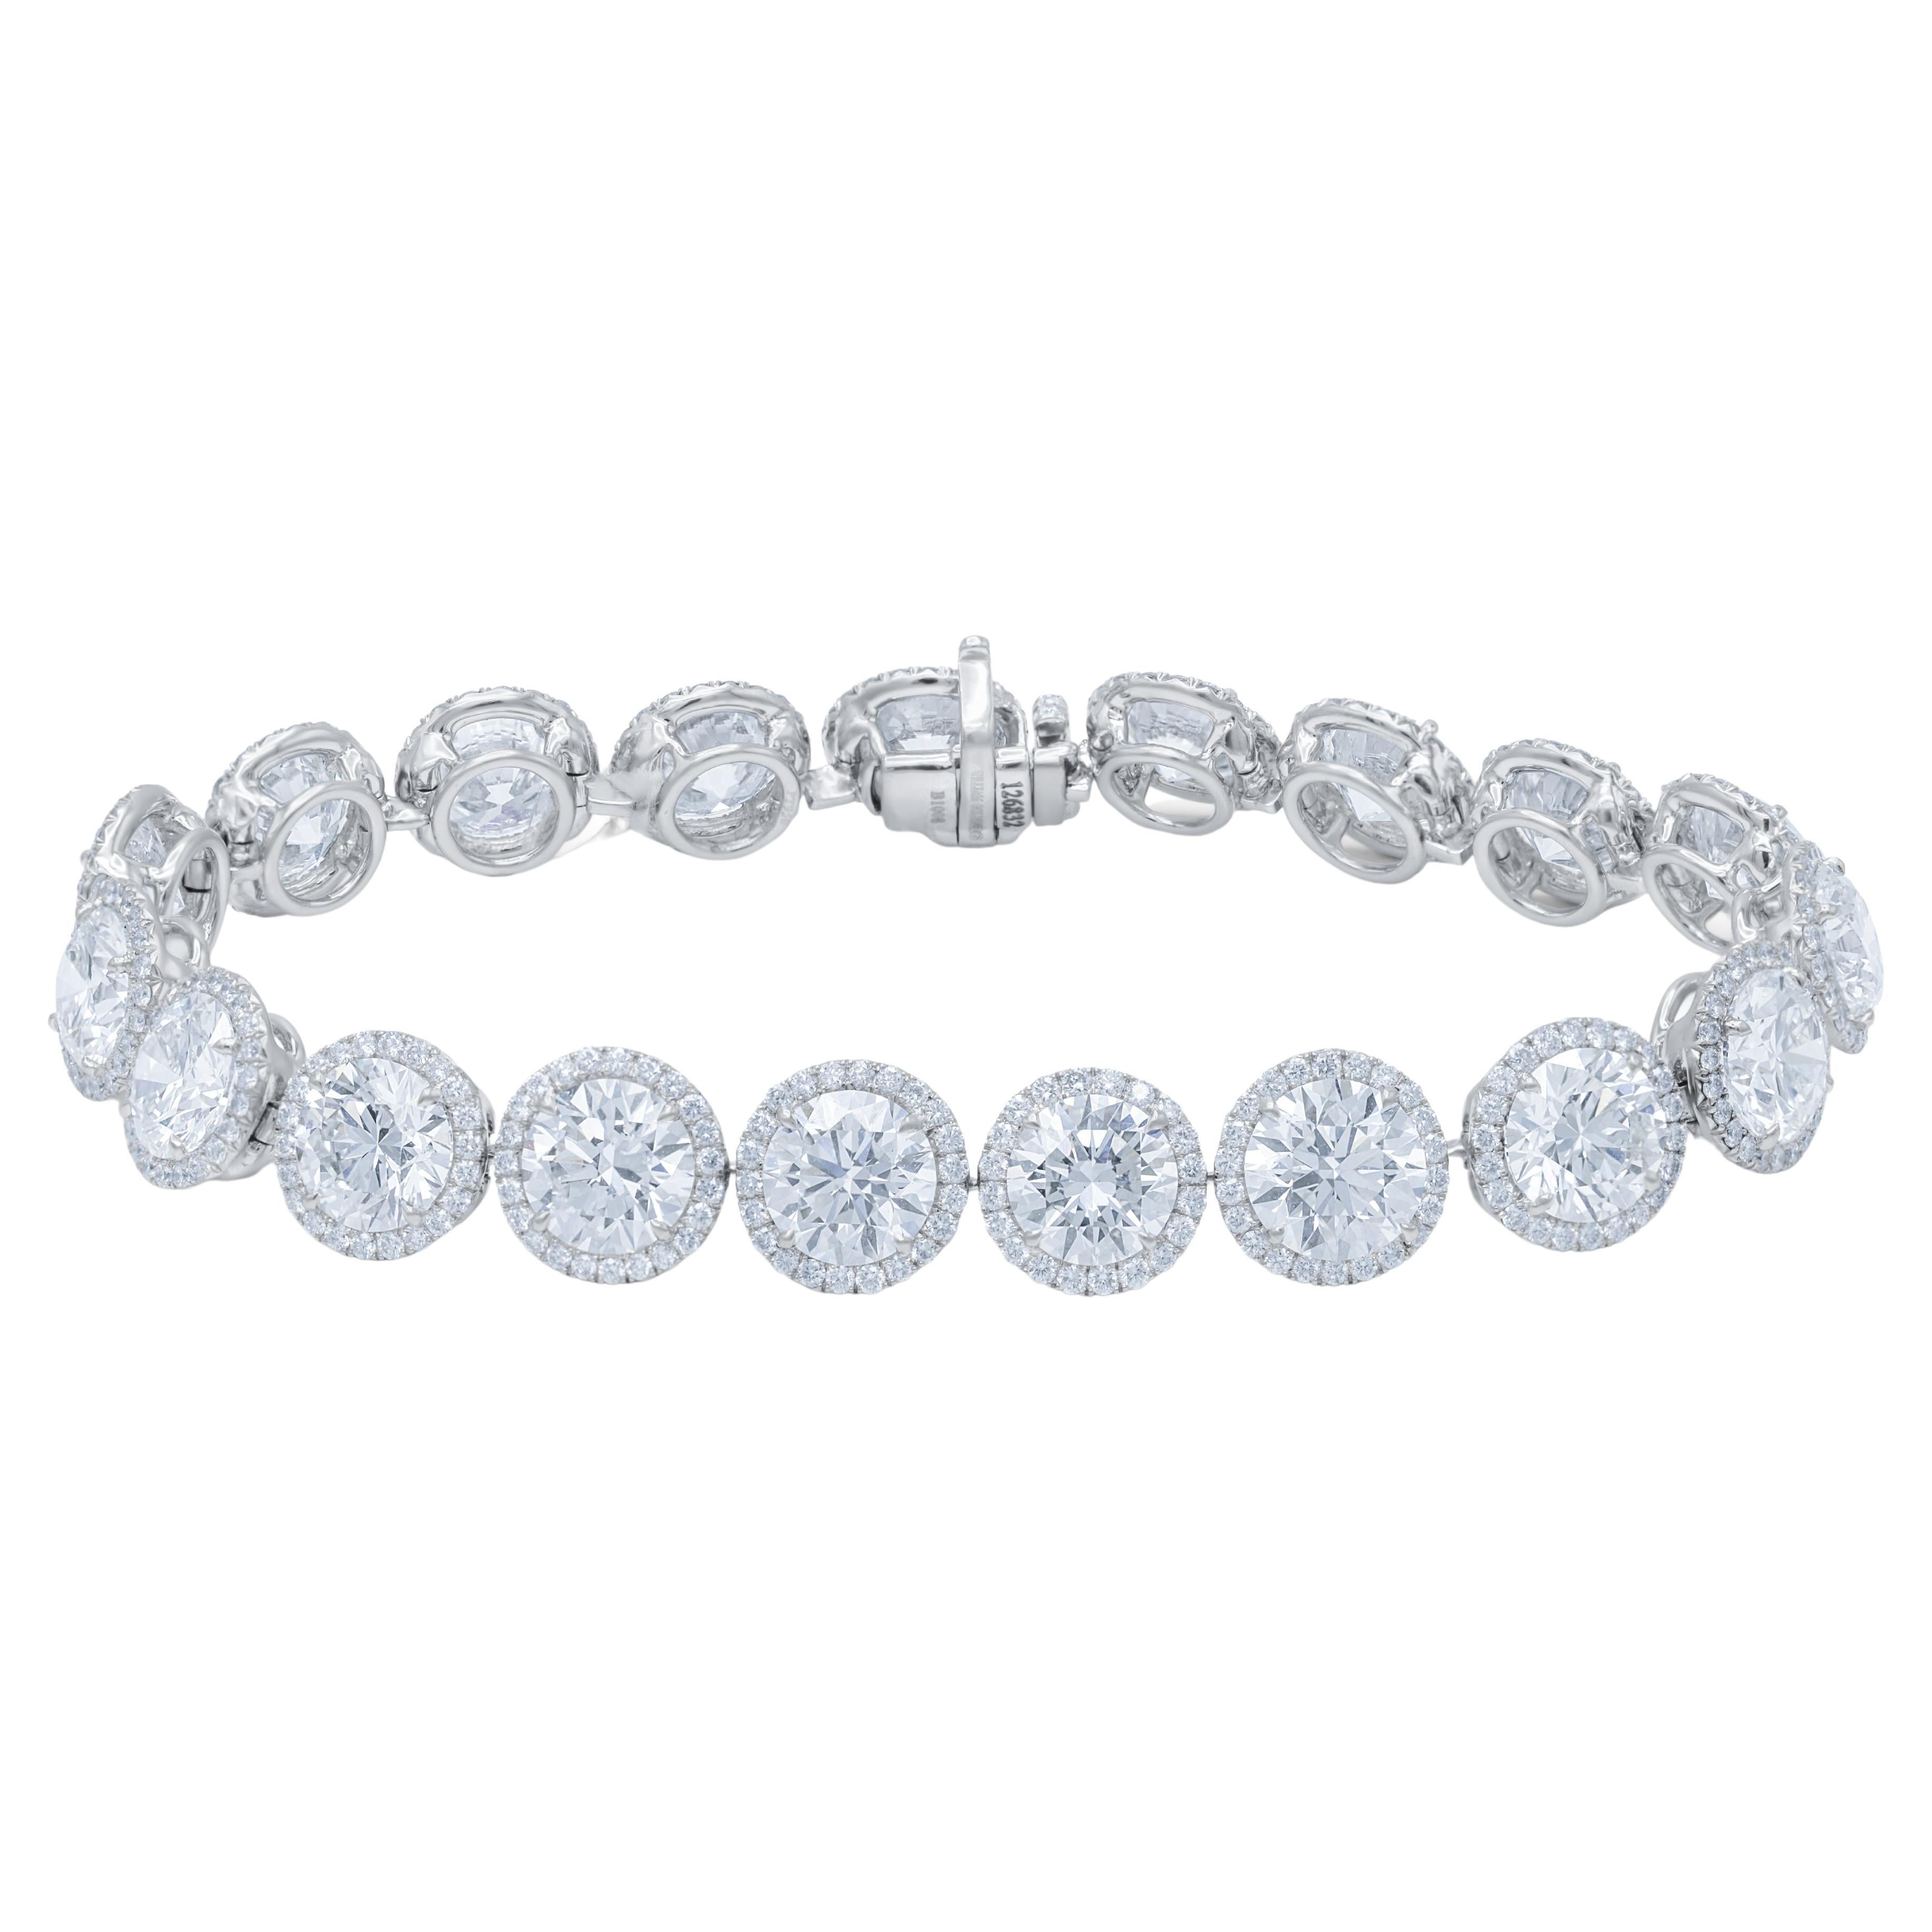 Diana M. Platinum diamond bracelet featuring 19.76cts surrounded by 2.16 cts For Sale